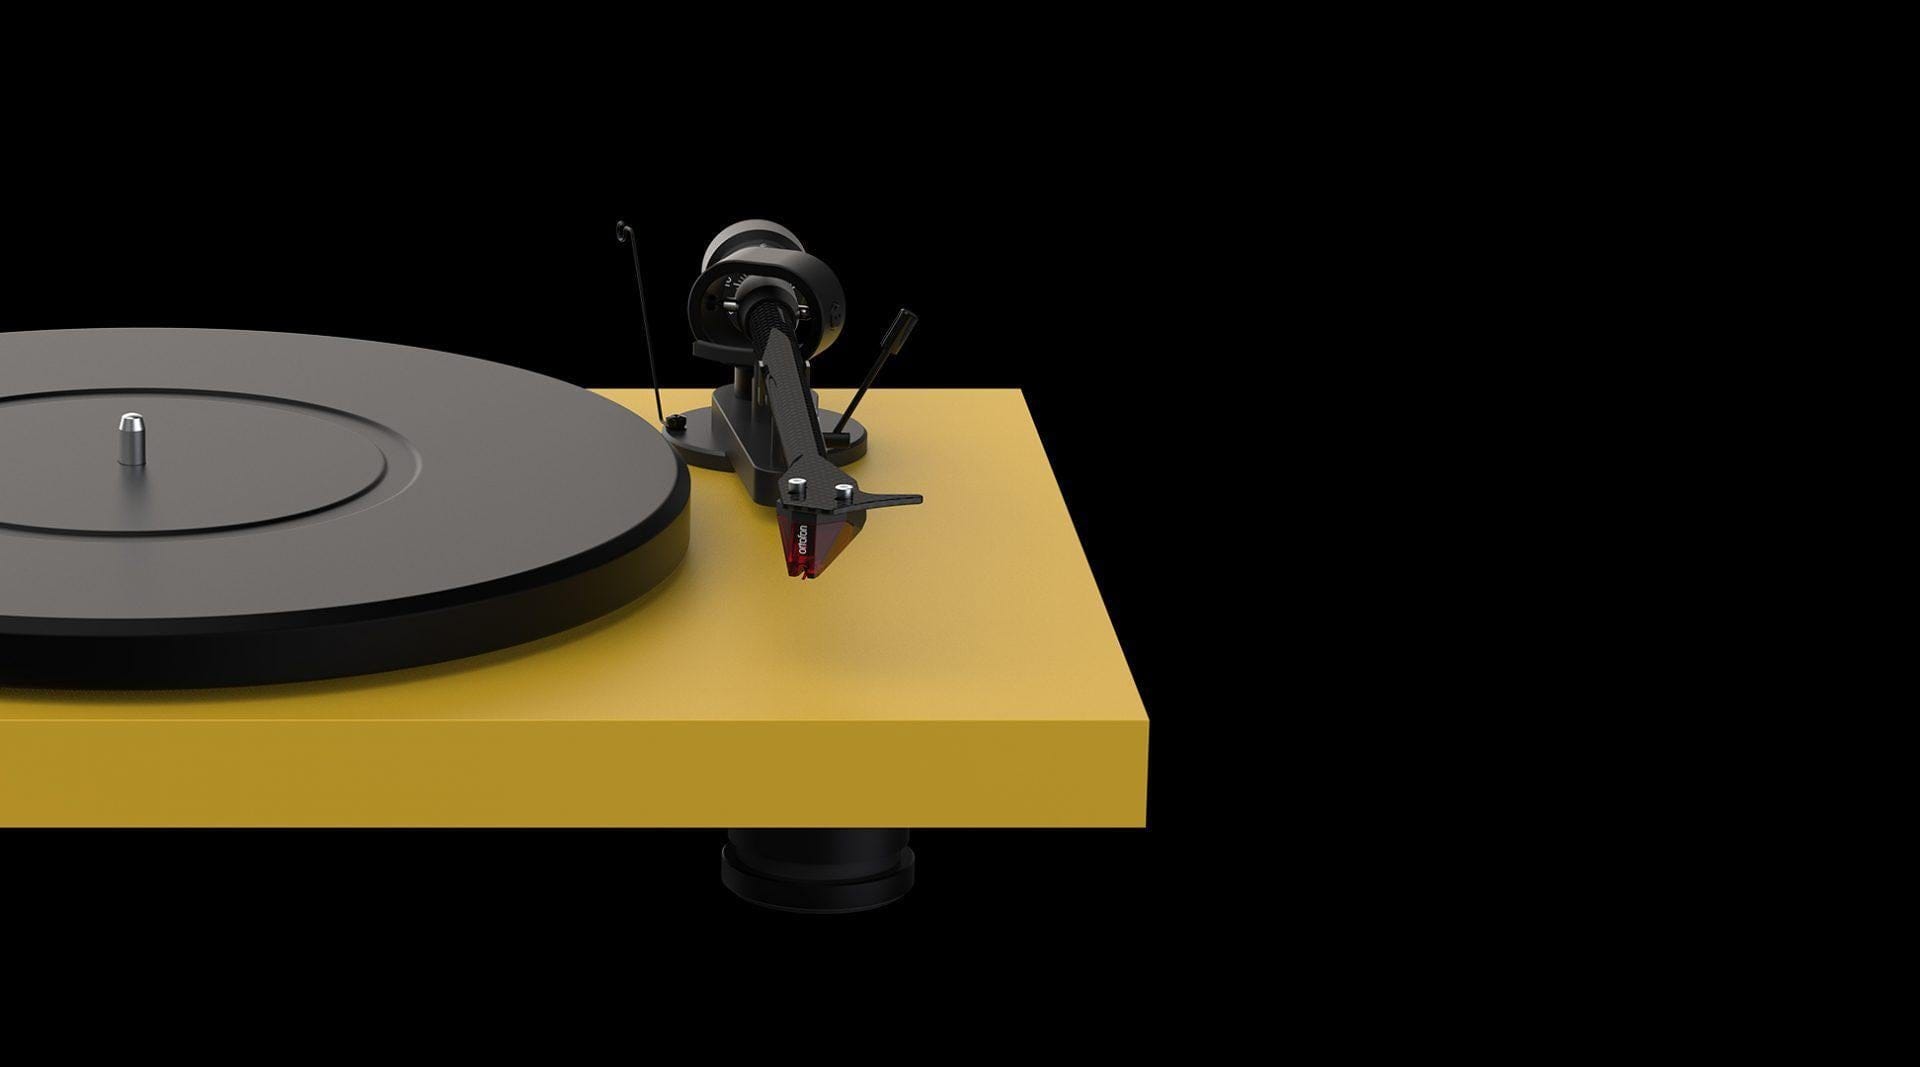 ProJect Audio Systems Turntables ProJect Debut Carbon EVO Turntable (High Gloss Black) with Ortofon 2M Red Cartridge